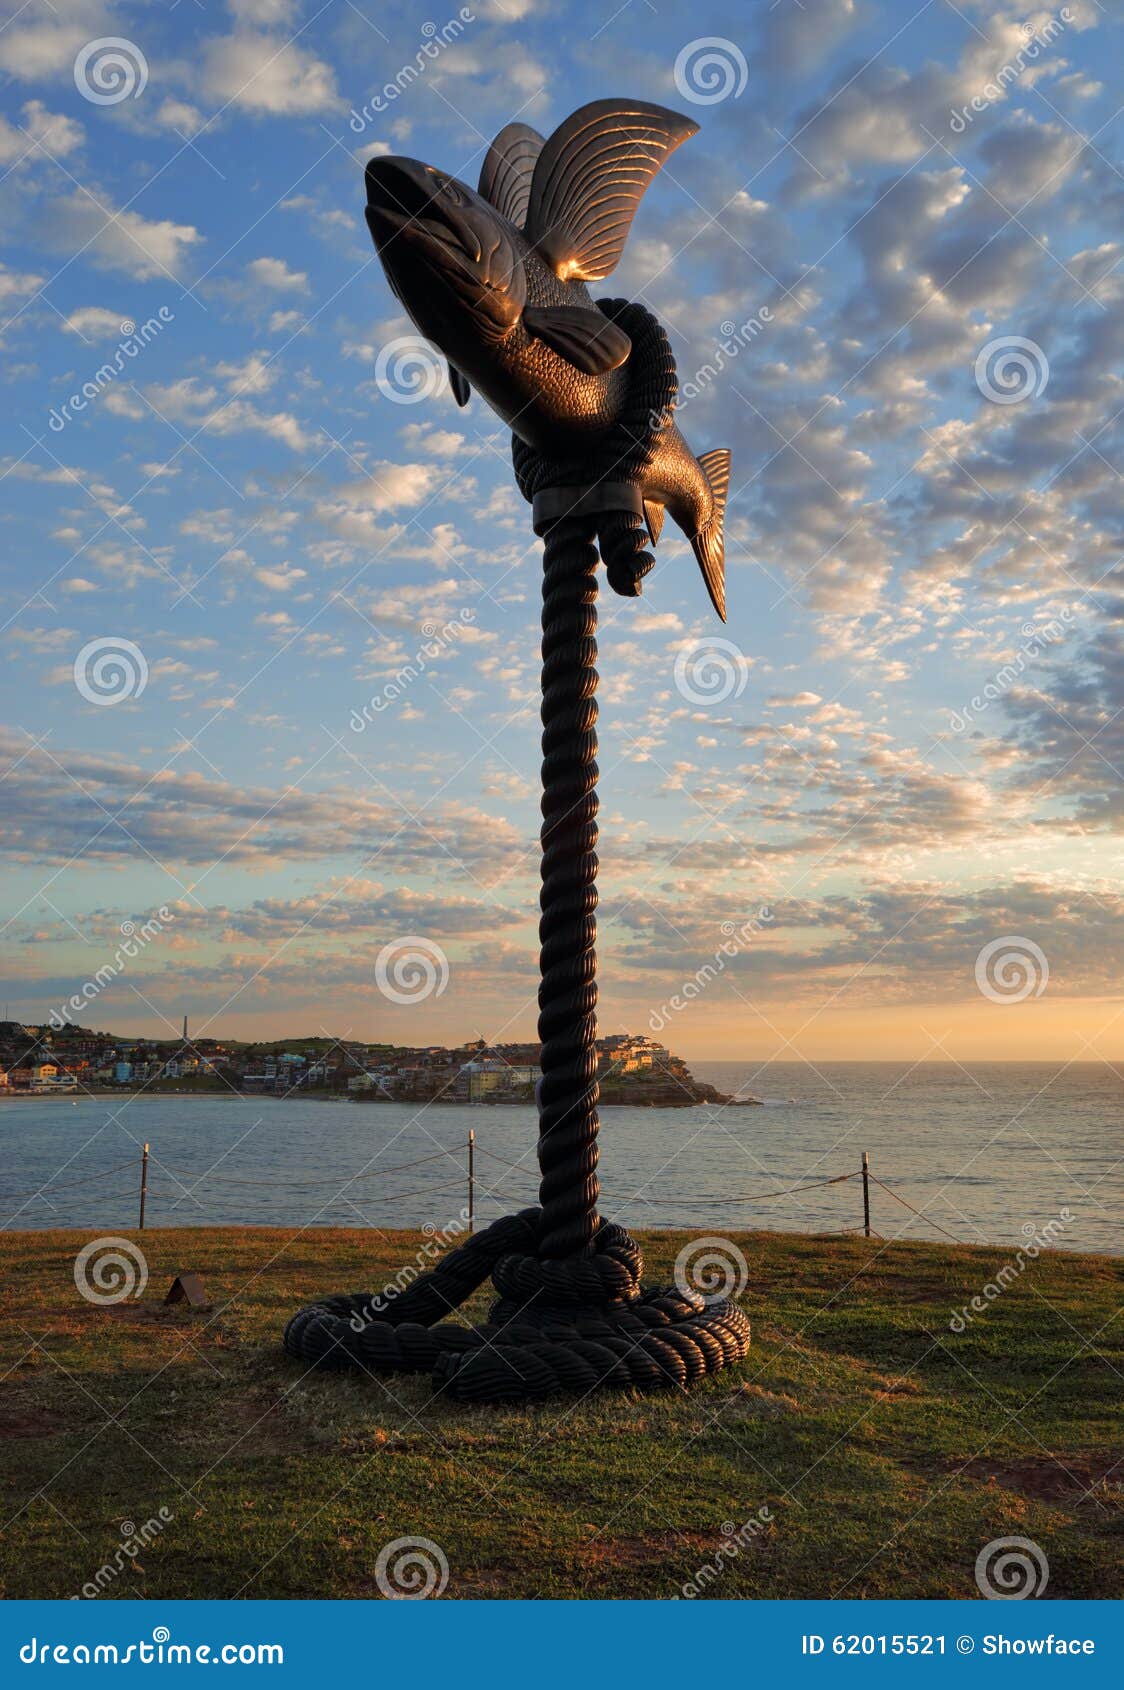 Sculpture by the Sea - Flying Fish Editorial Photo - Image of